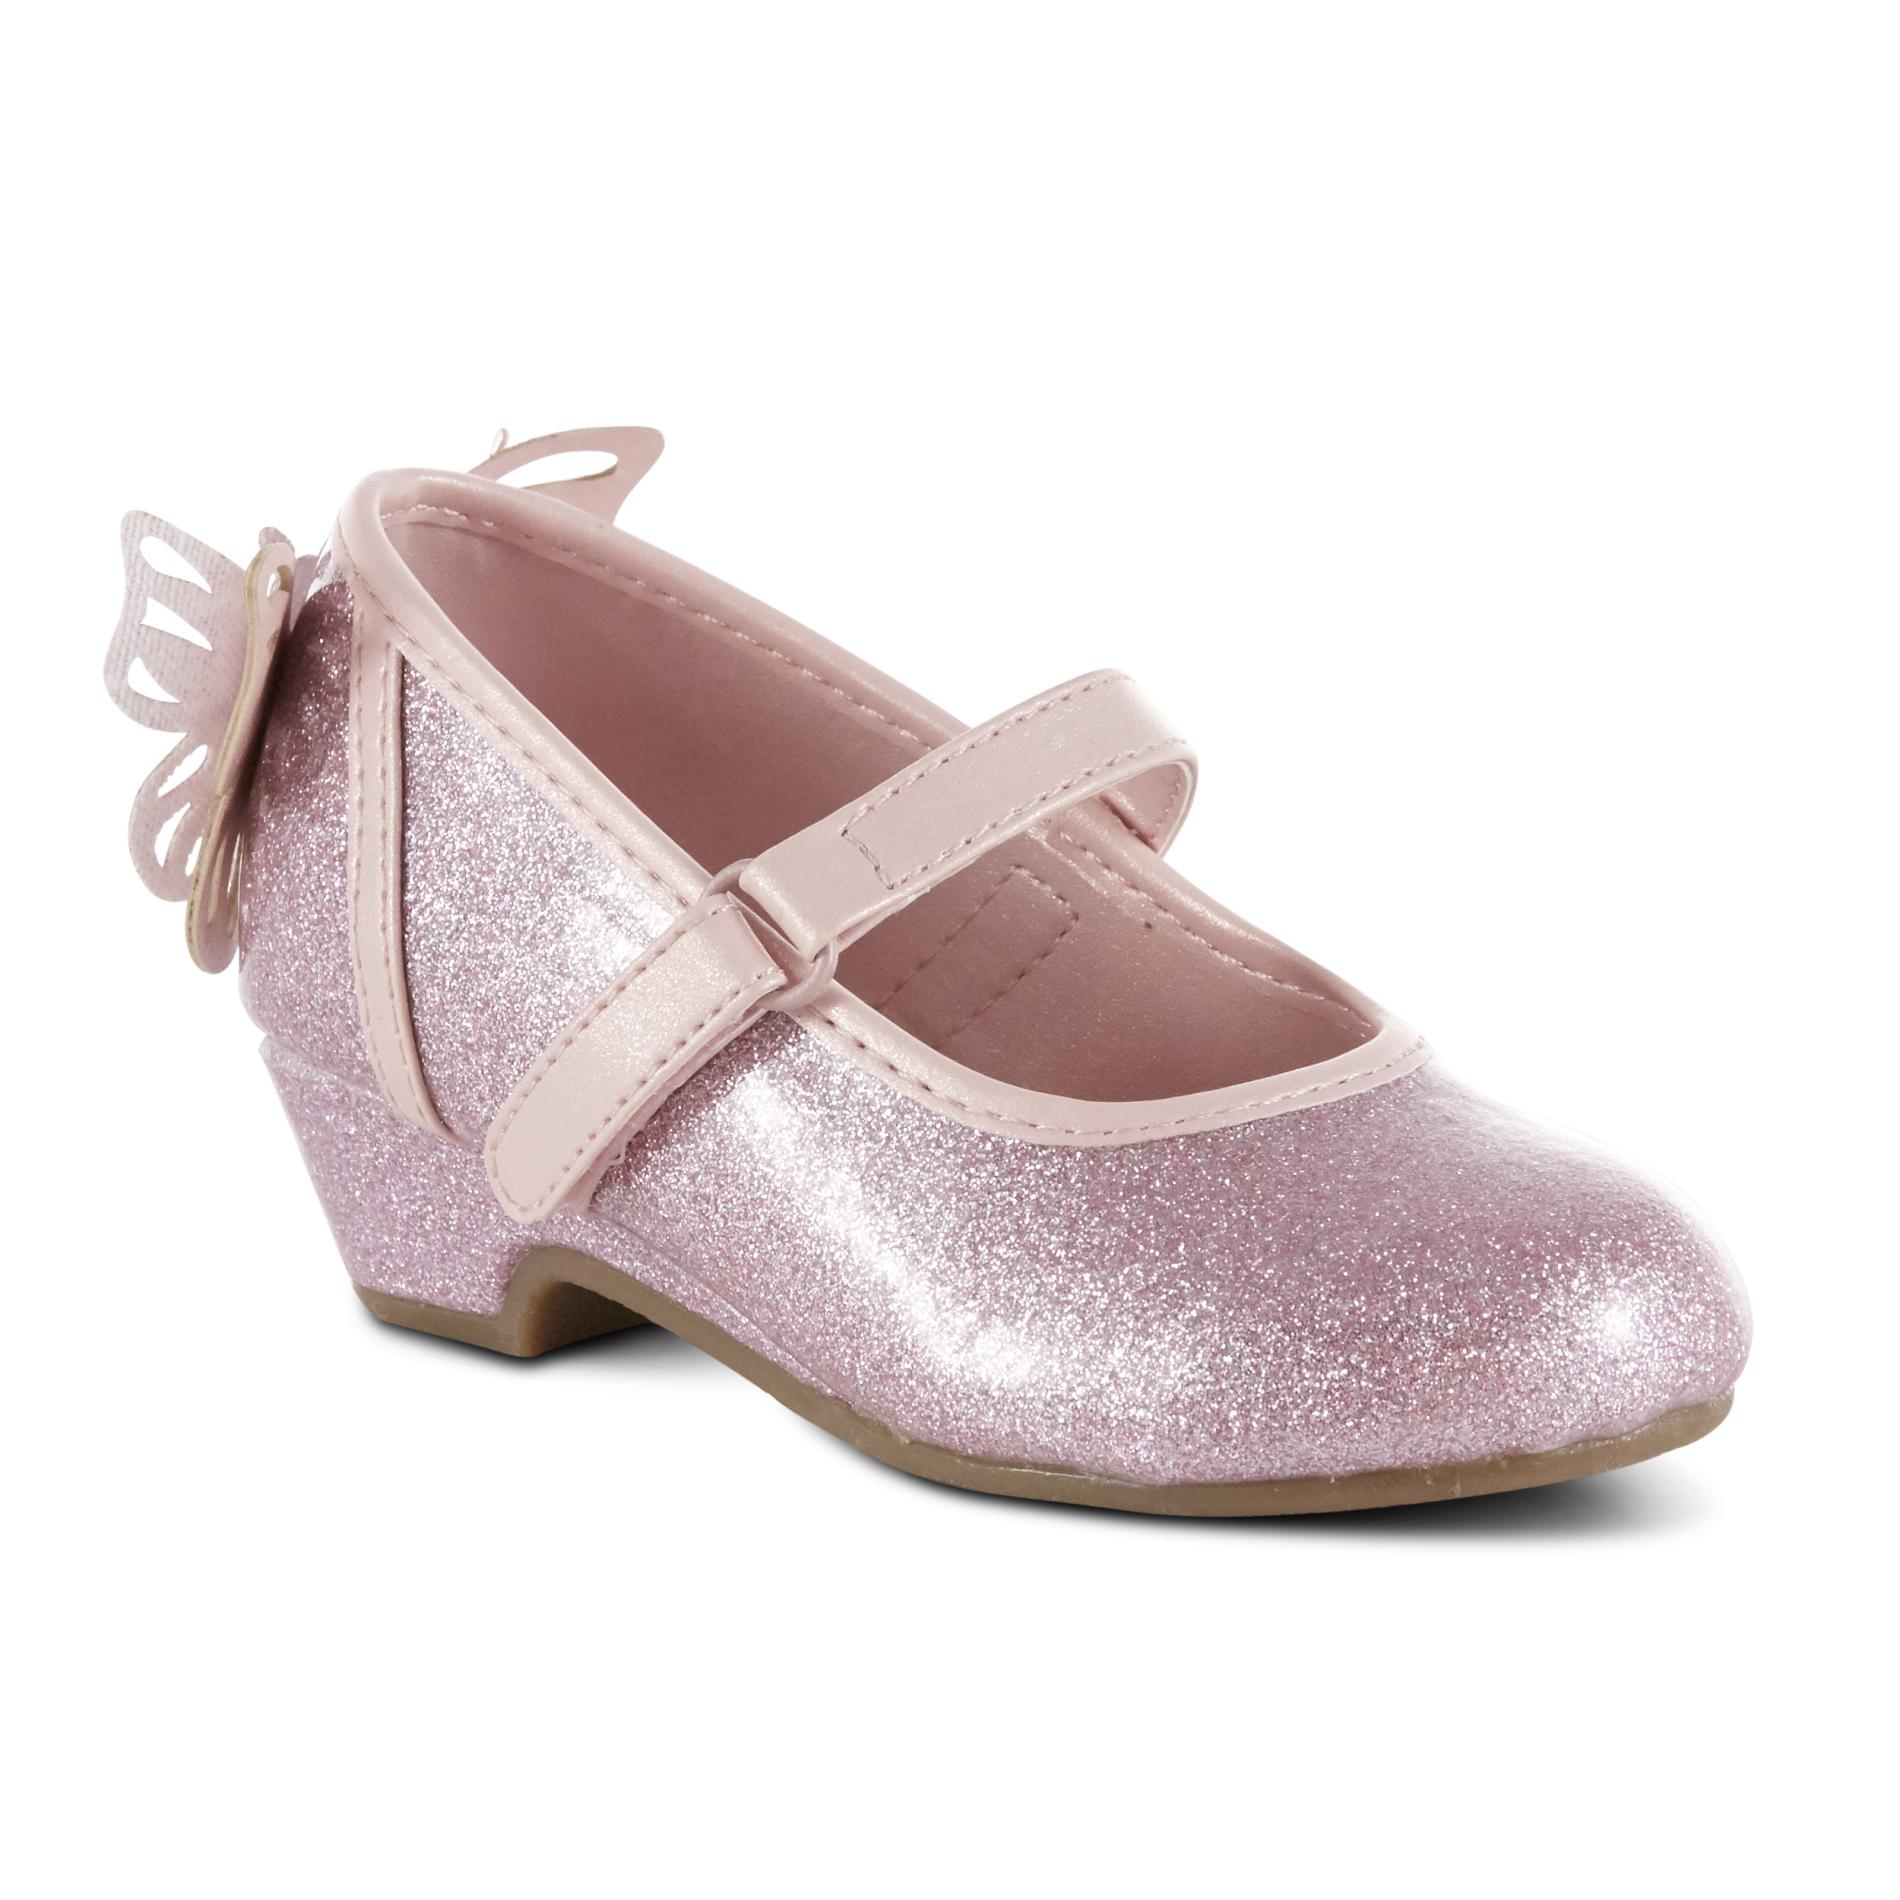 baby pink mary jane shoes